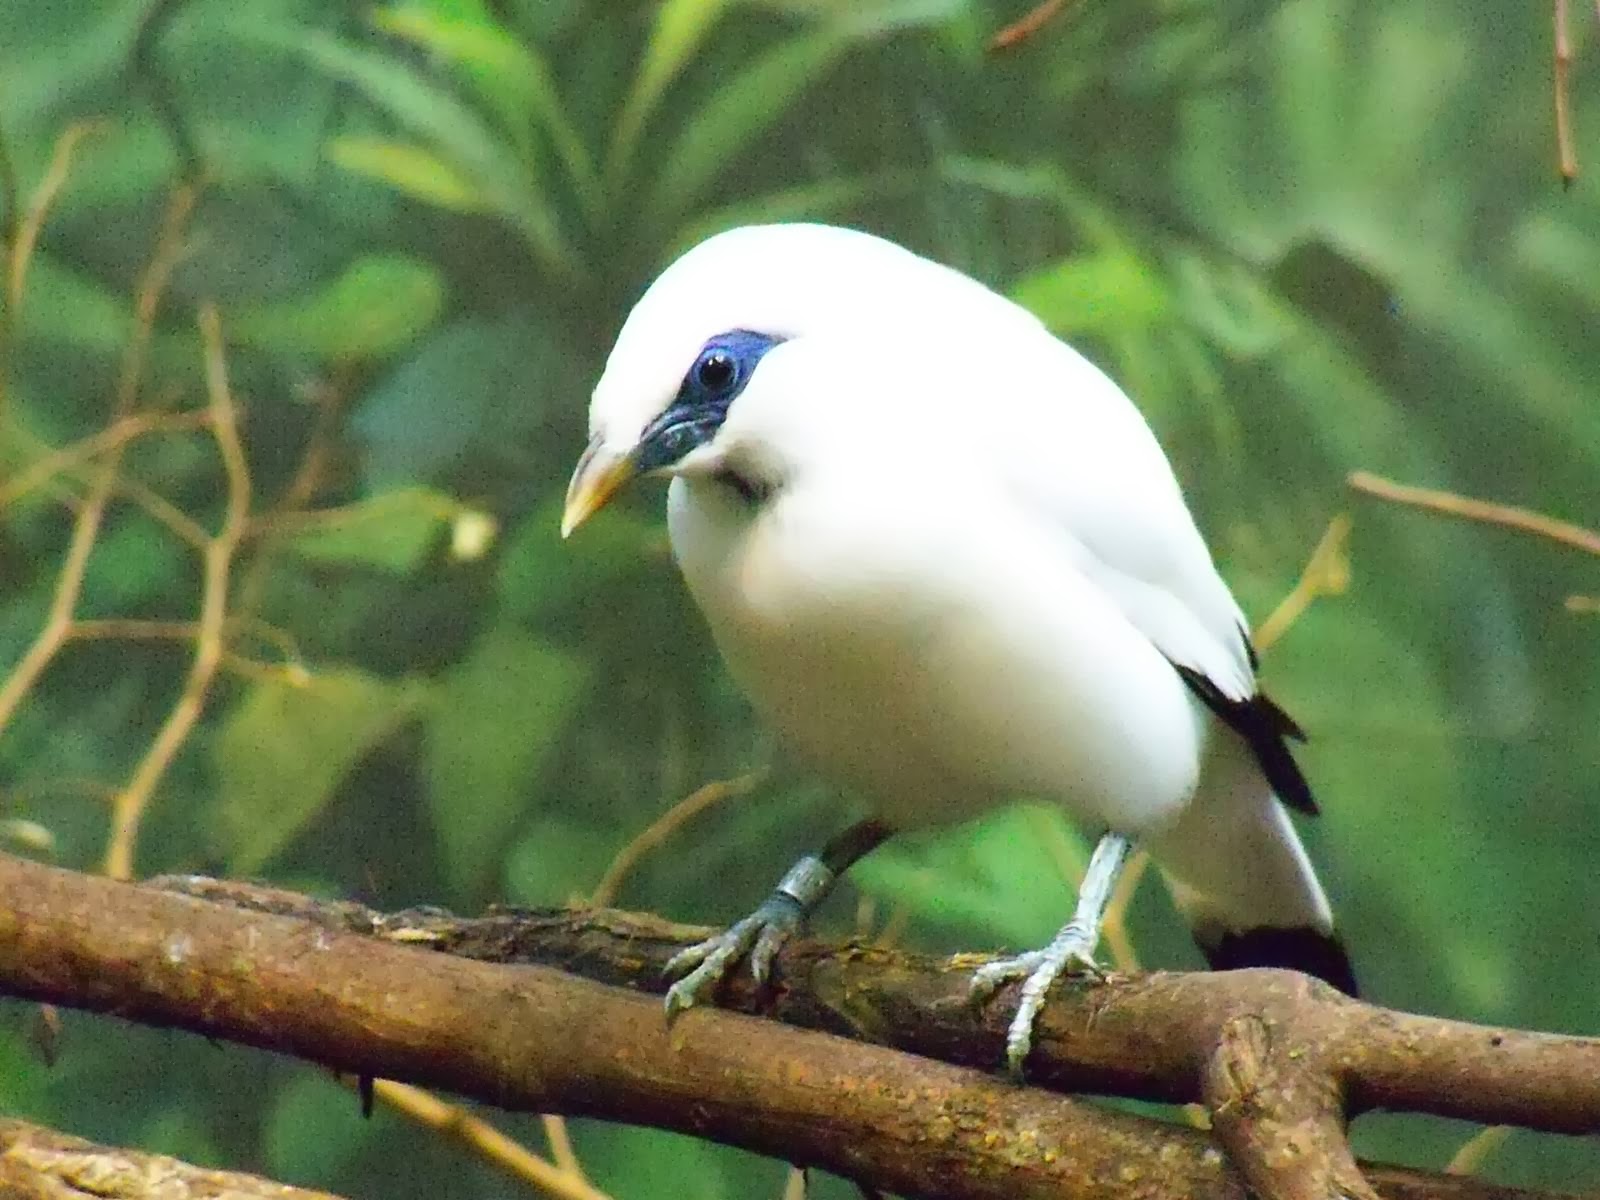 Bali Myna Backgrounds, Compatible - PC, Mobile, Gadgets| 1600x1200 px